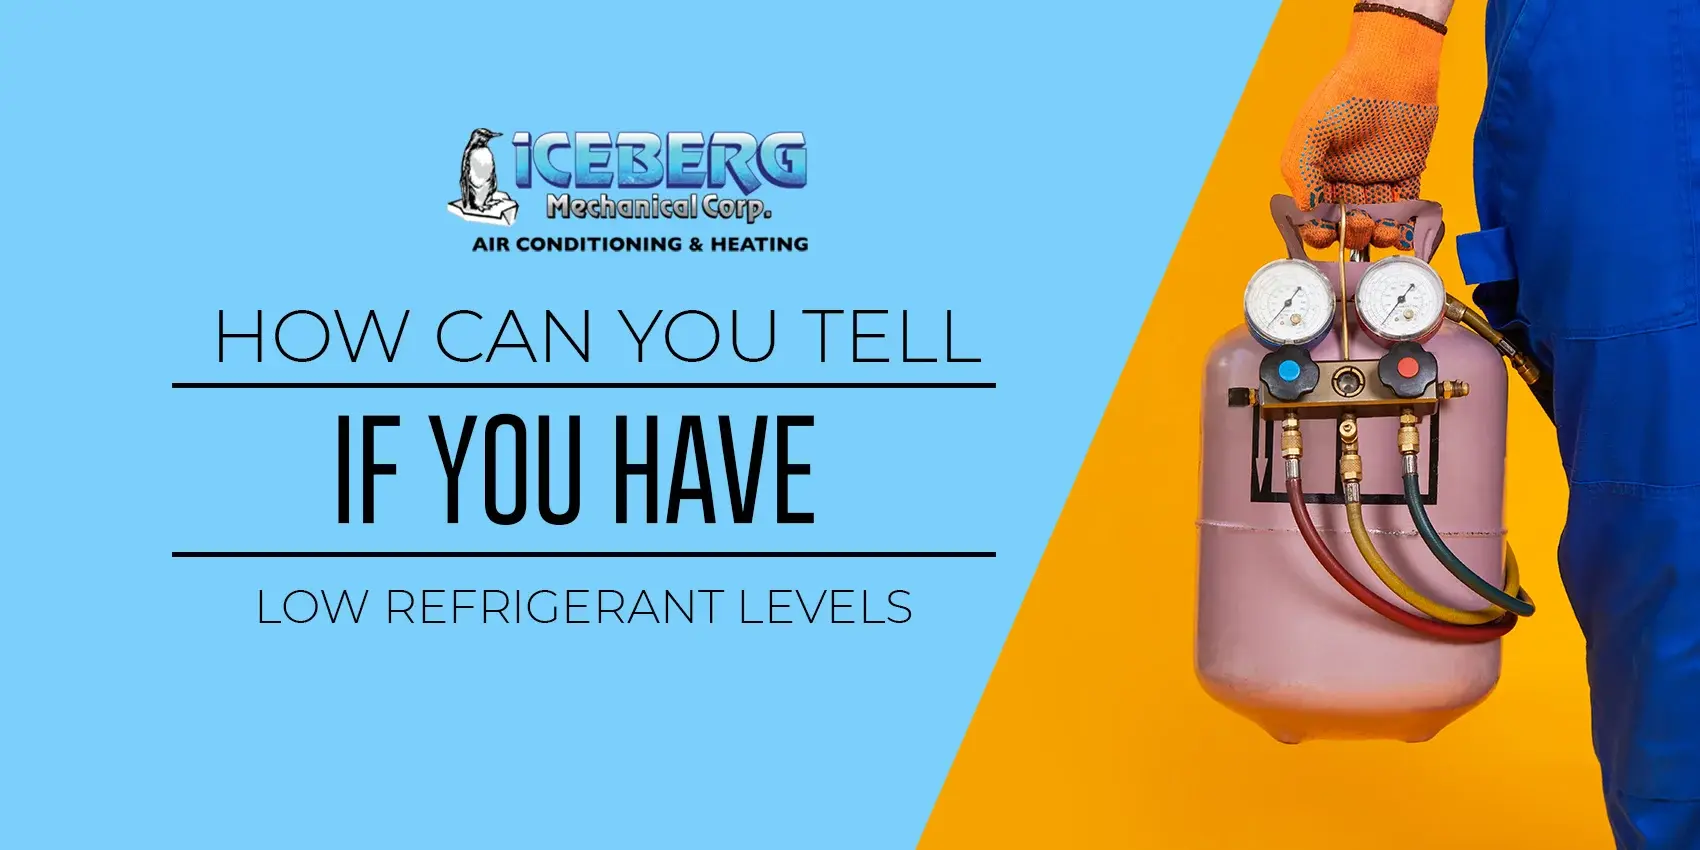 iceberg how can you tell if you have low refrigerant levels